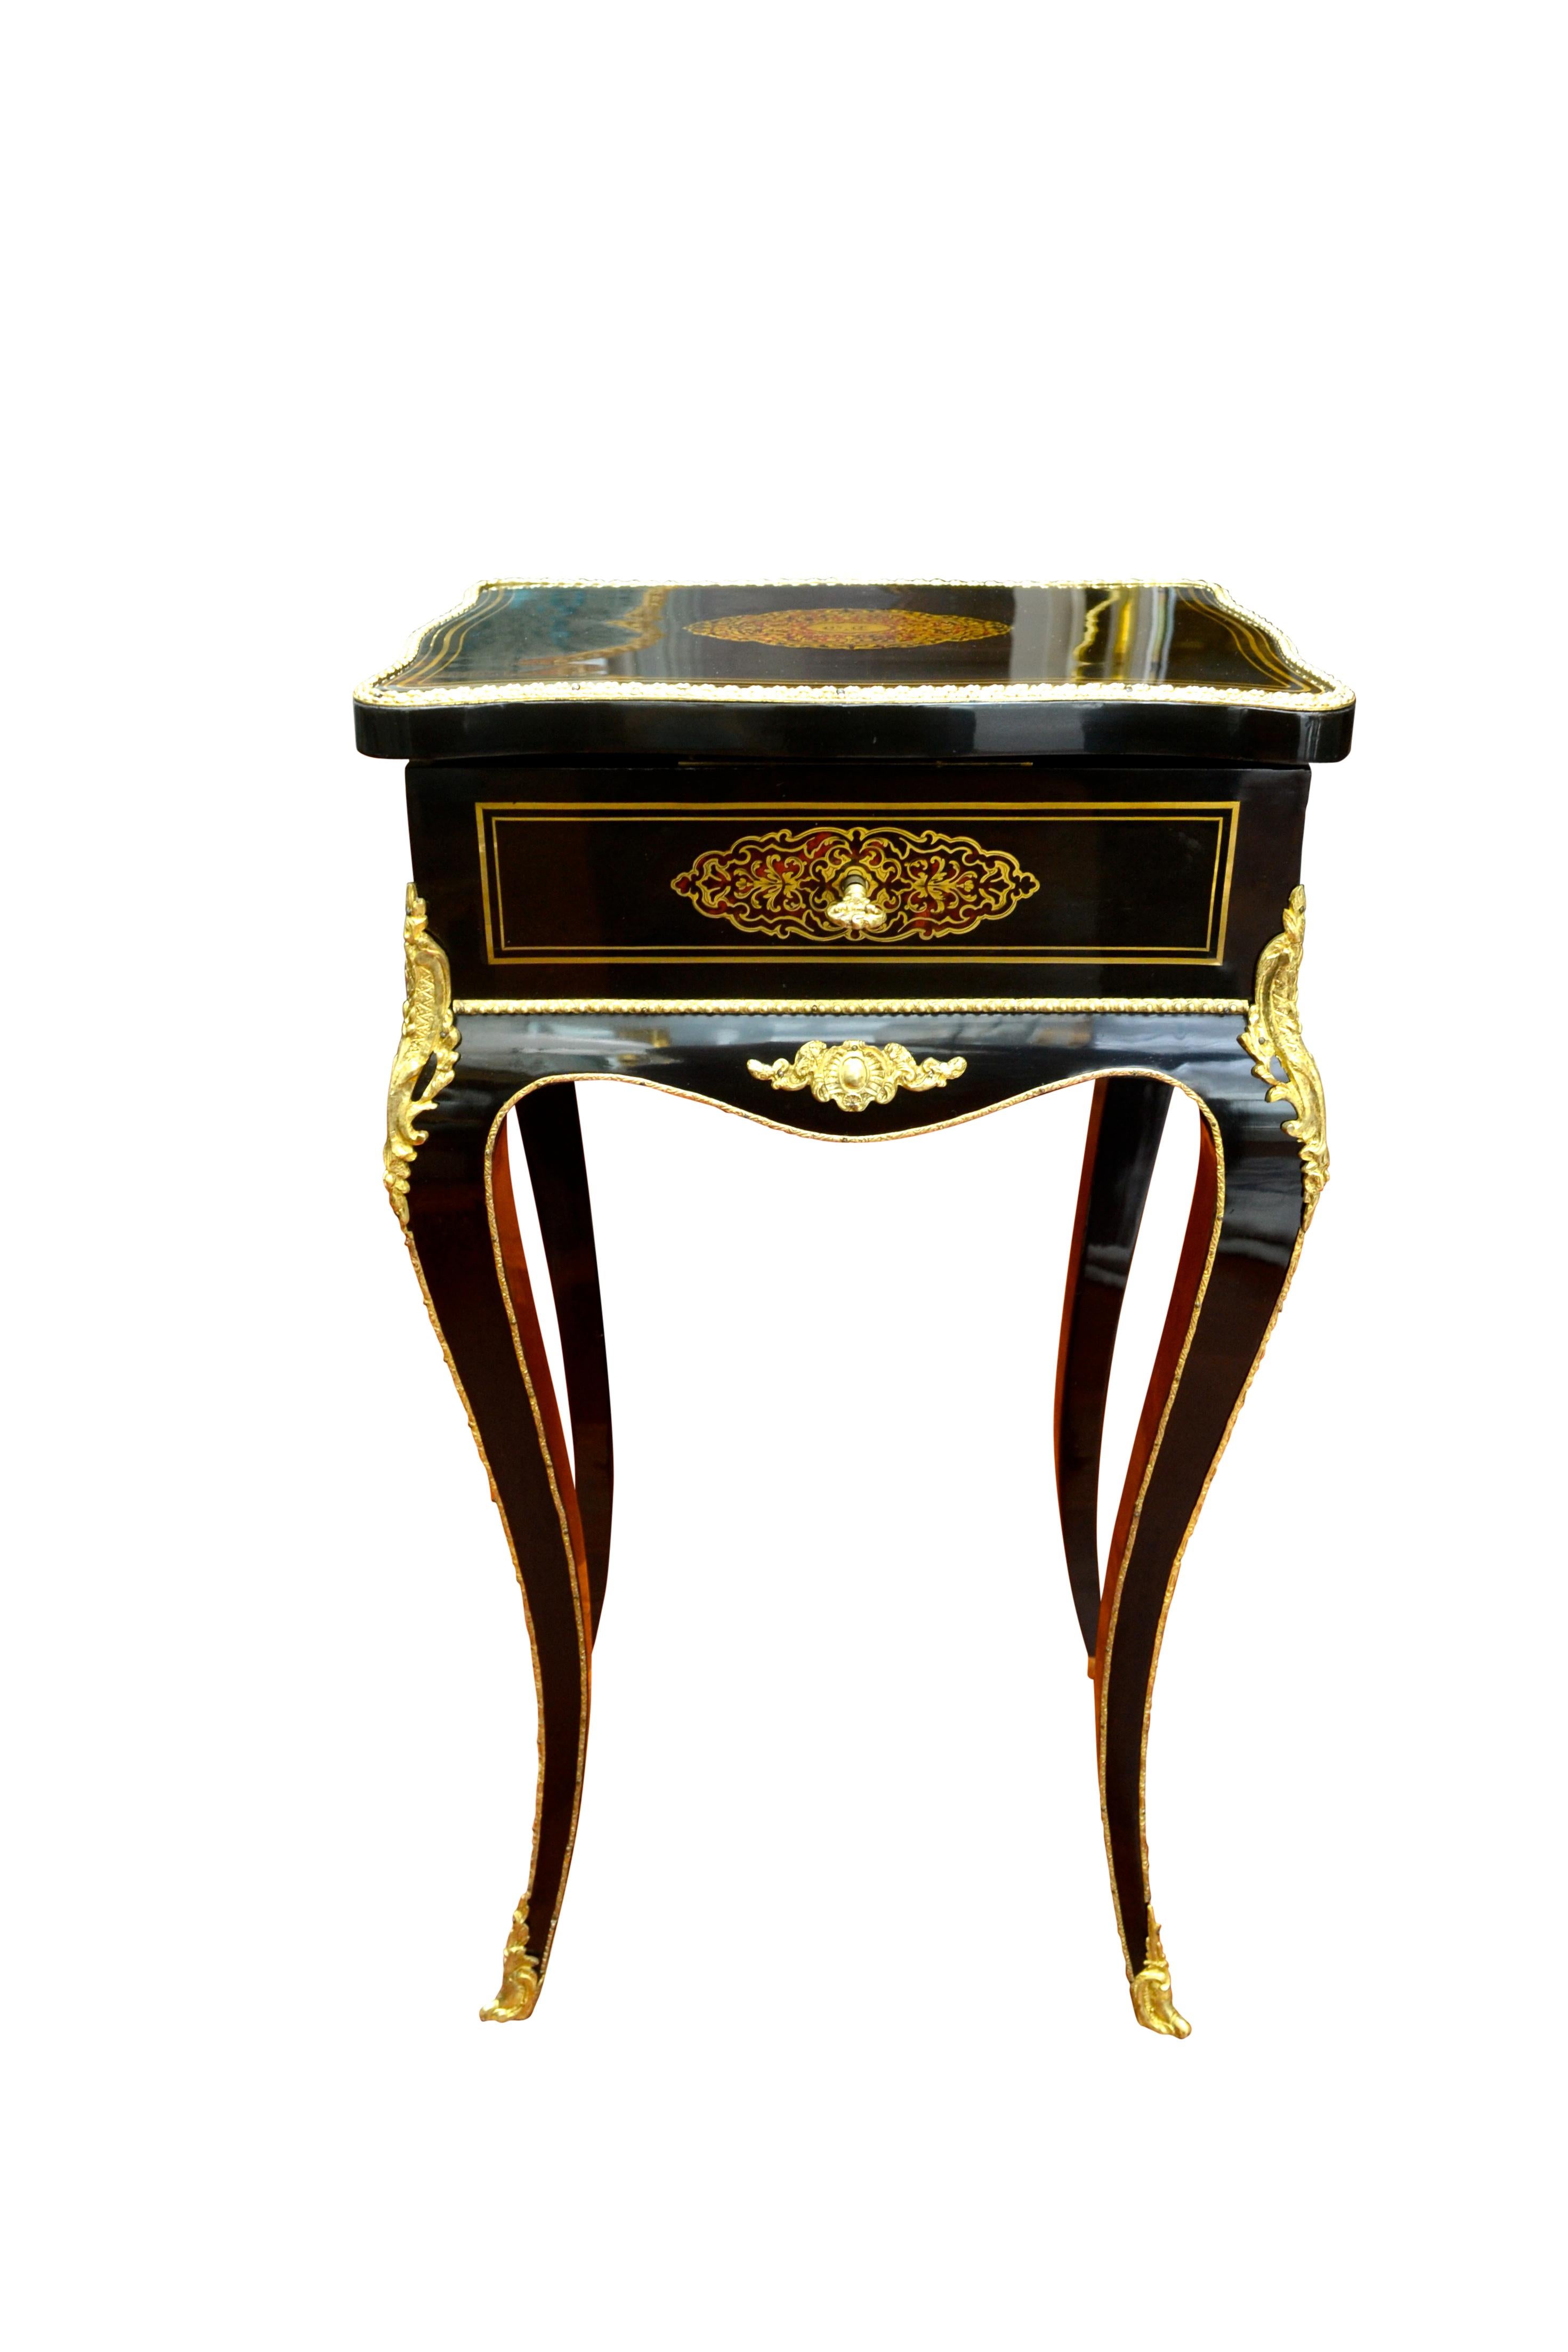 Napoleon III Ebonized Wood, Brass Inlay and Ormolu Jewelry Table by Tahan In Good Condition In Vancouver, British Columbia